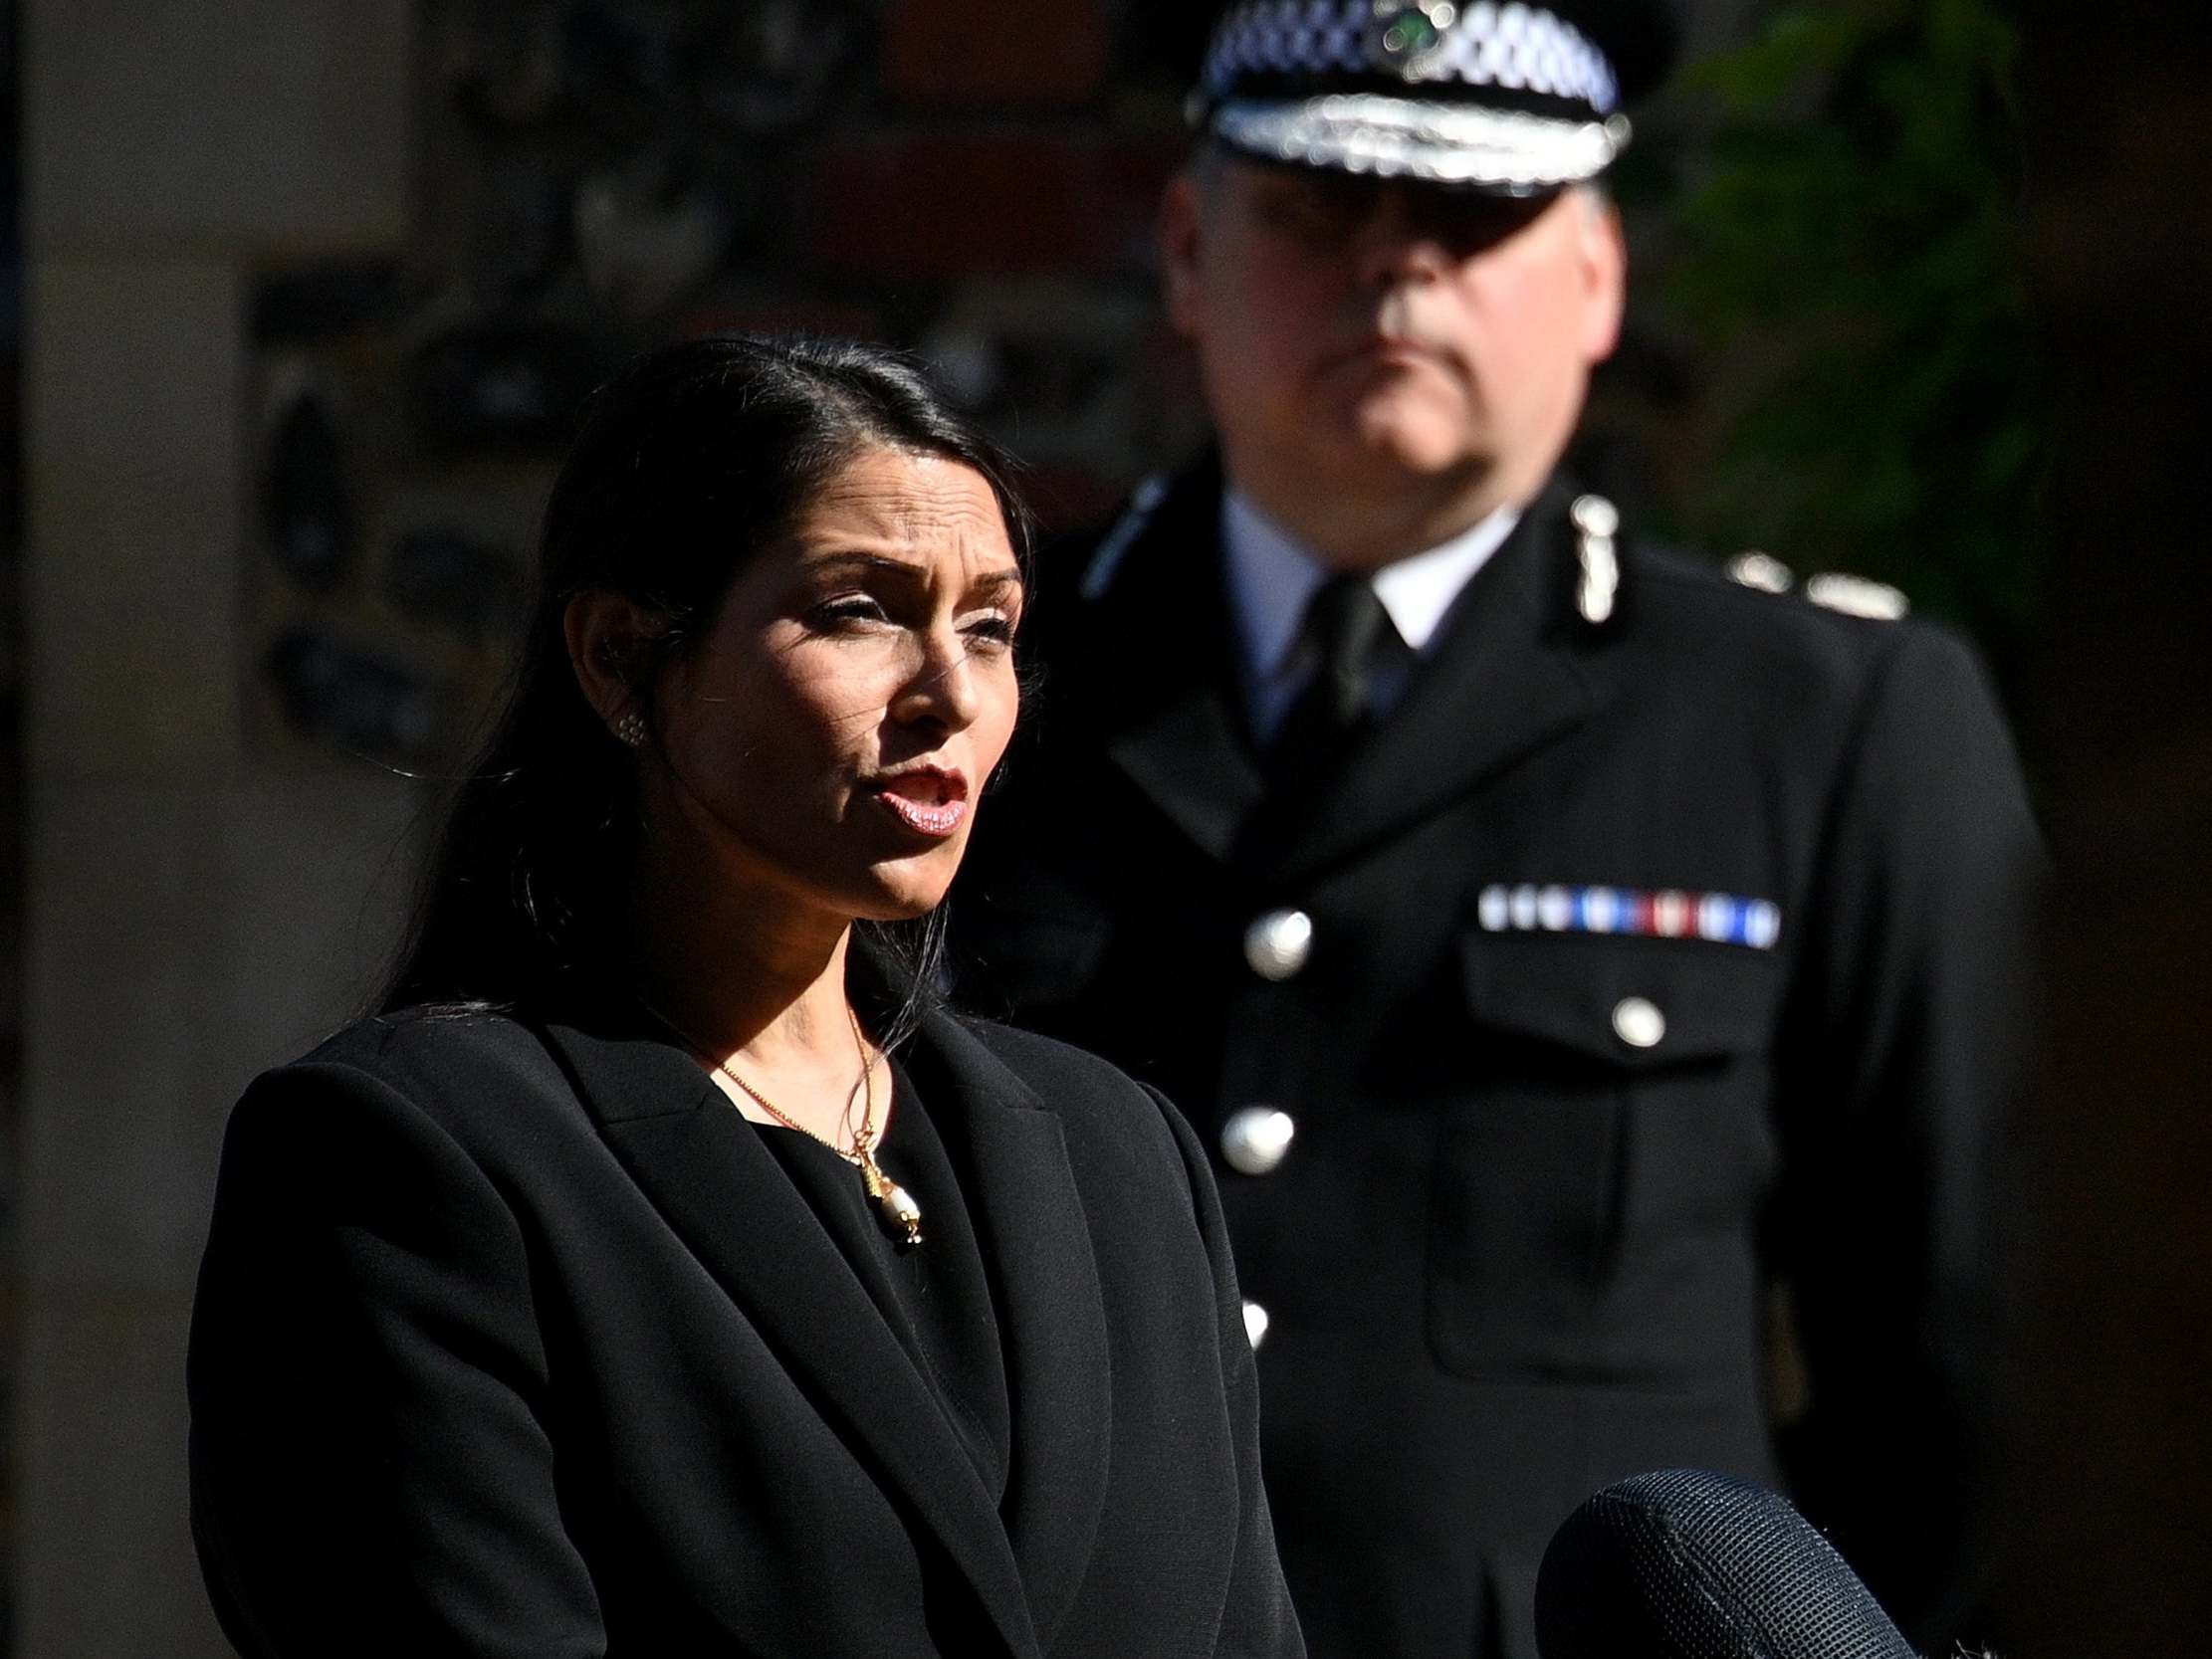 Priti Patel is popular with Conservative members, but has work to do to convince the public